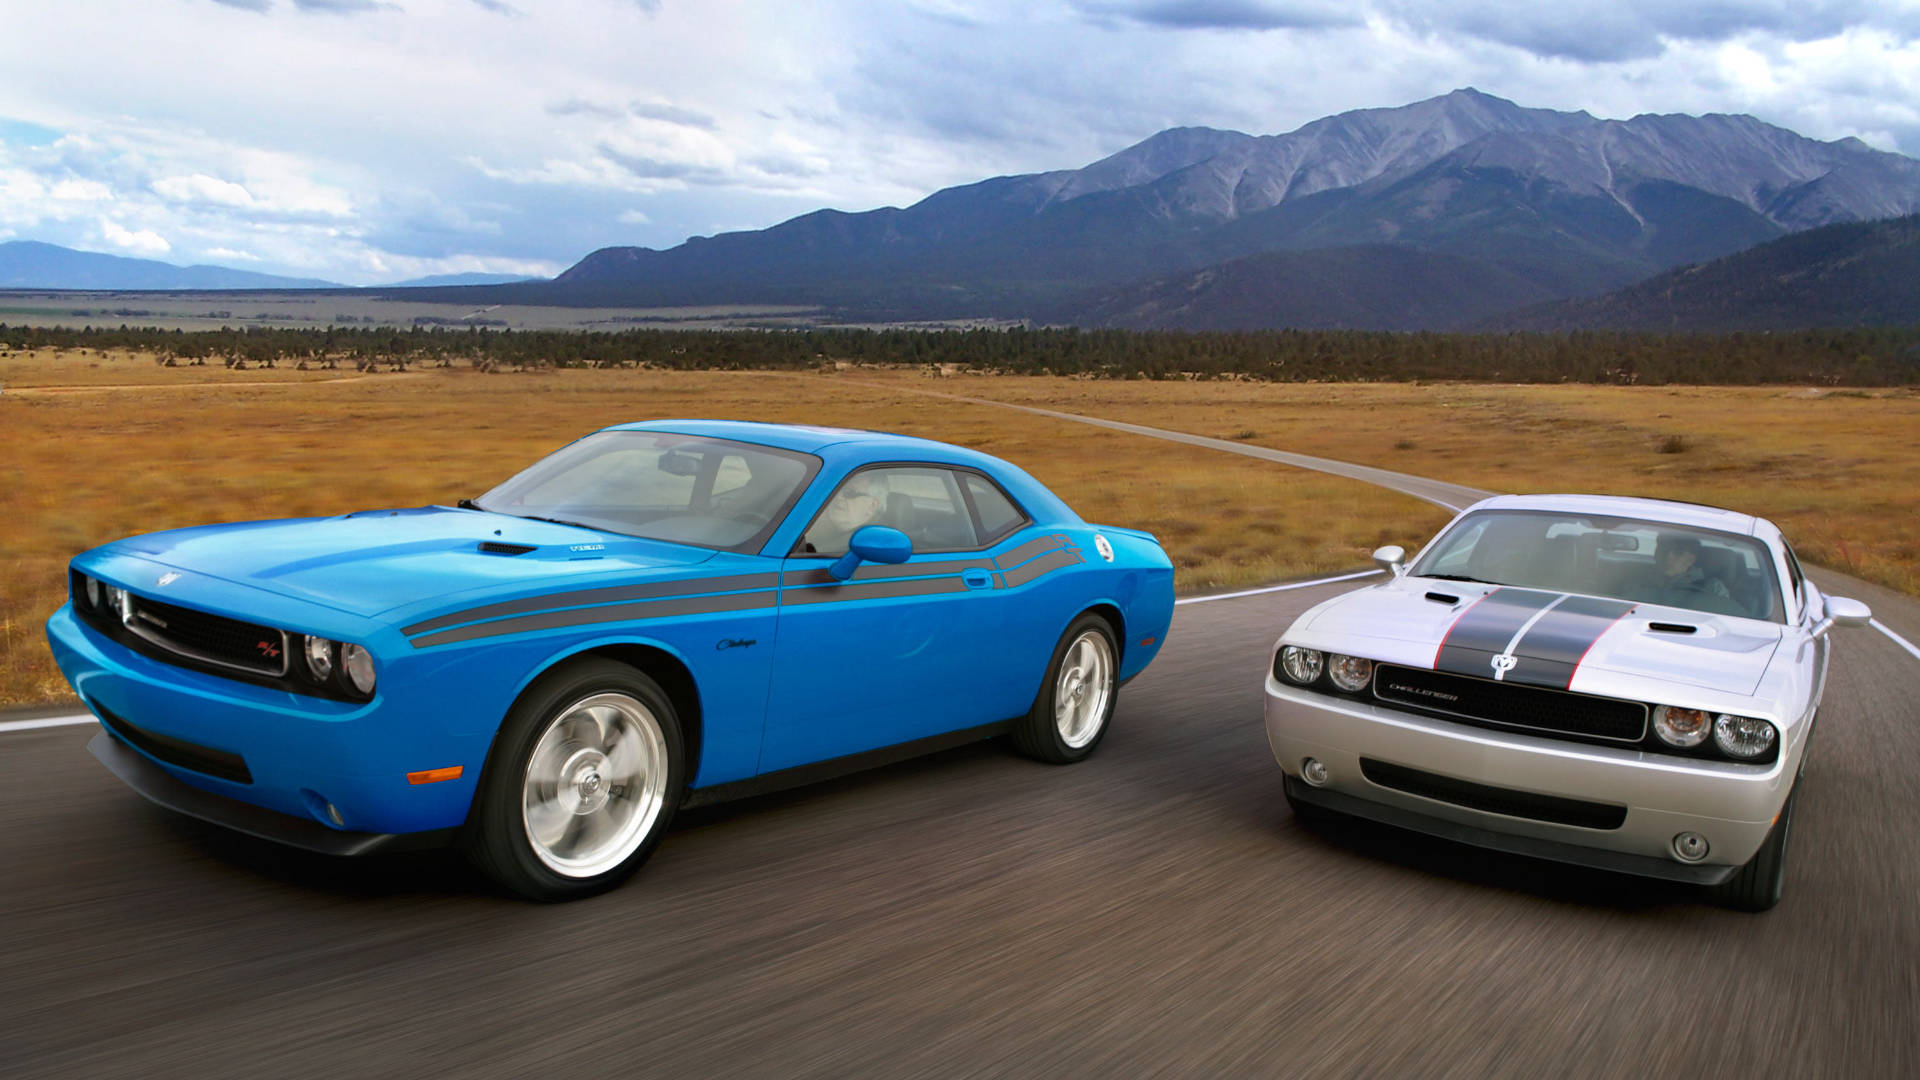 2009 White And Blue Dodge Challenger Cars Wallpaper